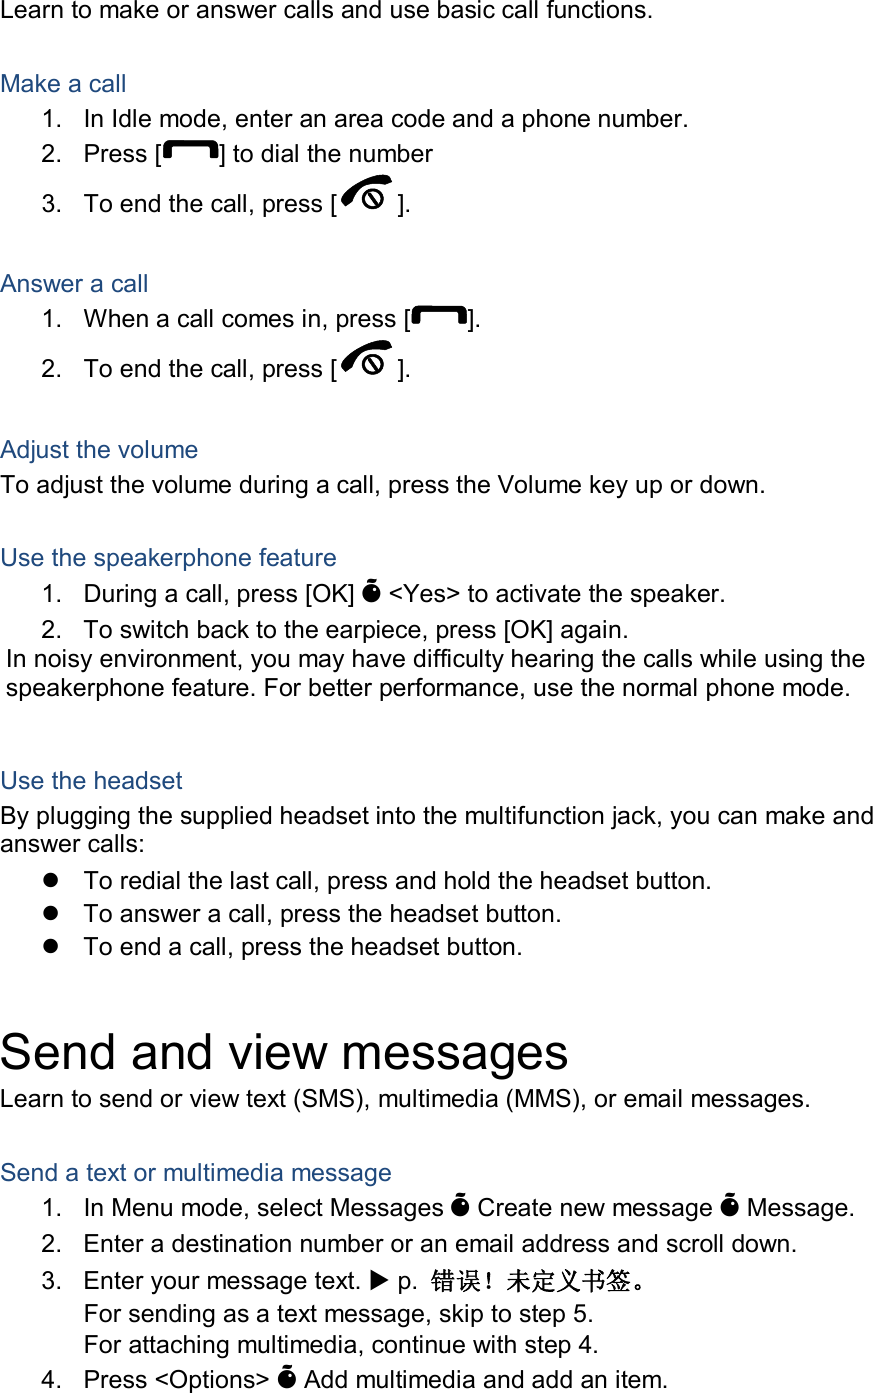 Learn to make or answer calls and use basic call functions.  Make a call 1.  In Idle mode, enter an area code and a phone number. 2.  Press [ ] to dial the number 3.  To end the call, press [ ].    Answer a call 1.  When a call comes in, press [ ]. 2.  To end the call, press [ ].  Adjust the volume To adjust the volume during a call, press the Volume key up or down.  Use the speakerphone feature 1.  During a call, press [OK] Õ &lt;Yes&gt; to activate the speaker. 2.  To switch back to the earpiece, press [OK] again. In noisy environment, you may have difficulty hearing the calls while using the speakerphone feature. For better performance, use the normal phone mode.  Use the headset By plugging the supplied headset into the multifunction jack, you can make and answer calls:   To redial the last call, press and hold the headset button.   To answer a call, press the headset button.   To end a call, press the headset button.  Send and view messages Learn to send or view text (SMS), multimedia (MMS), or email messages.  Send a text or multimedia message 1.  In Menu mode, select Messages Õ Create new message Õ Message. 2.  Enter a destination number or an email address and scroll down. 3.  Enter your message text.  p.  错误！未定义书签。 For sending as a text message, skip to step 5. For attaching multimedia, continue with step 4. 4.  Press &lt;Options&gt; Õ Add multimedia and add an item. 